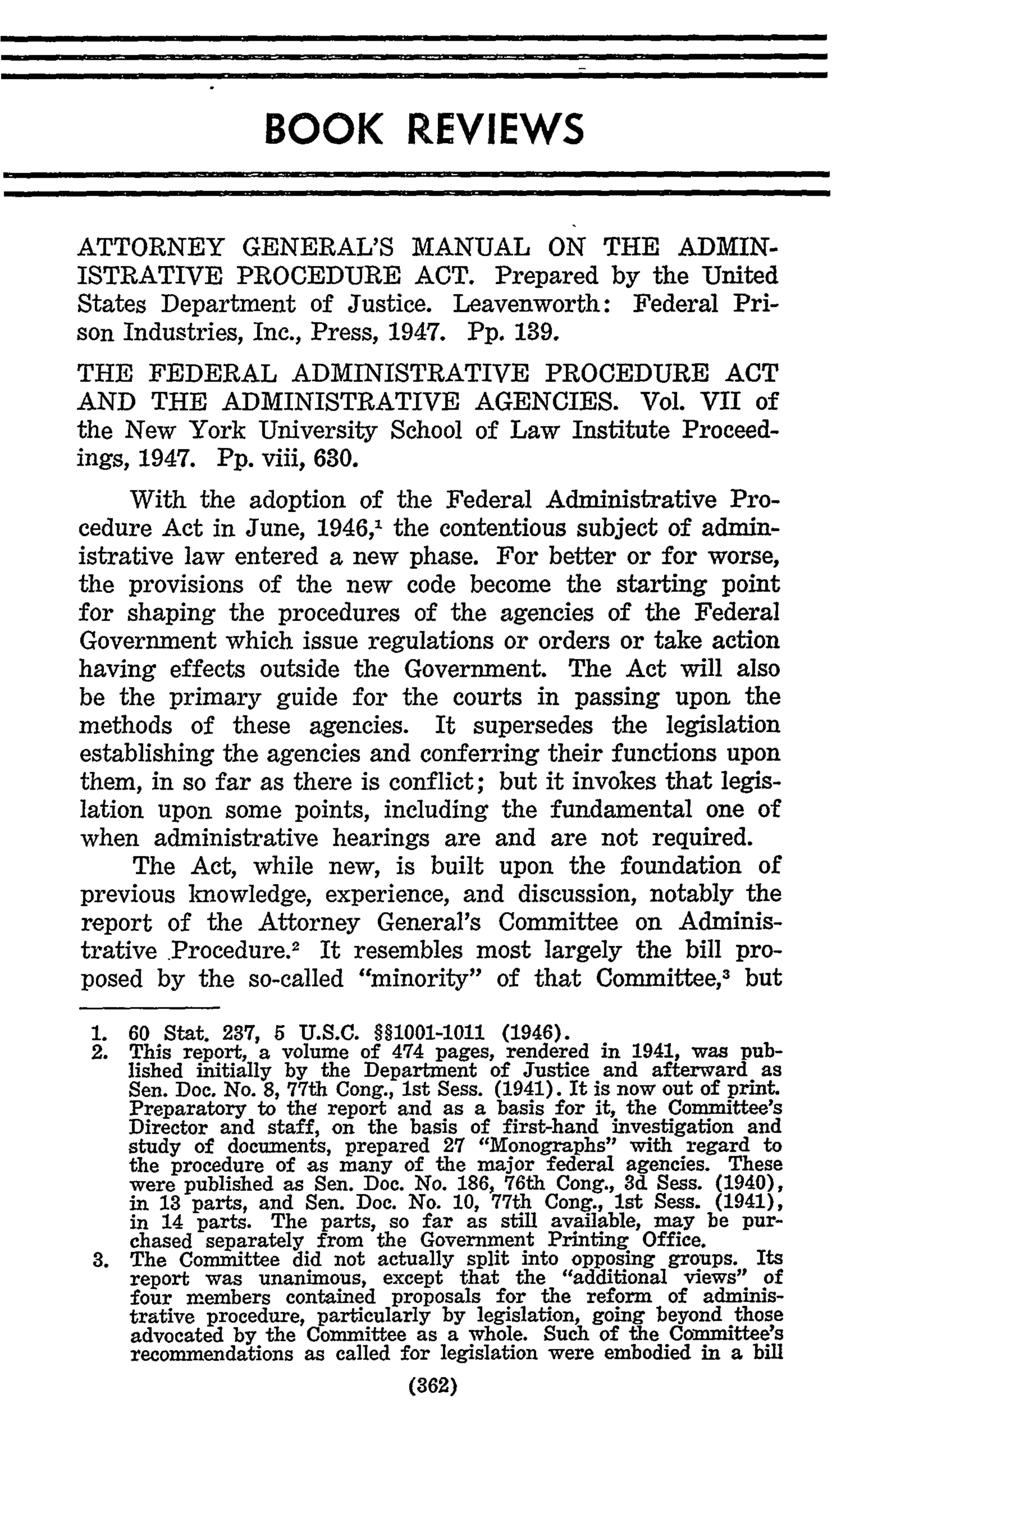 BOOK REVIEWS ATTORNEY GENERAL'S MANUAL ON THE ADMIN- ISTRATIVE PROCEDURE ACT. Prepared by the United States Department of Justice. Leavenworth: Federal Prison Industries, Inc., Press, 1947. Pp. 139.